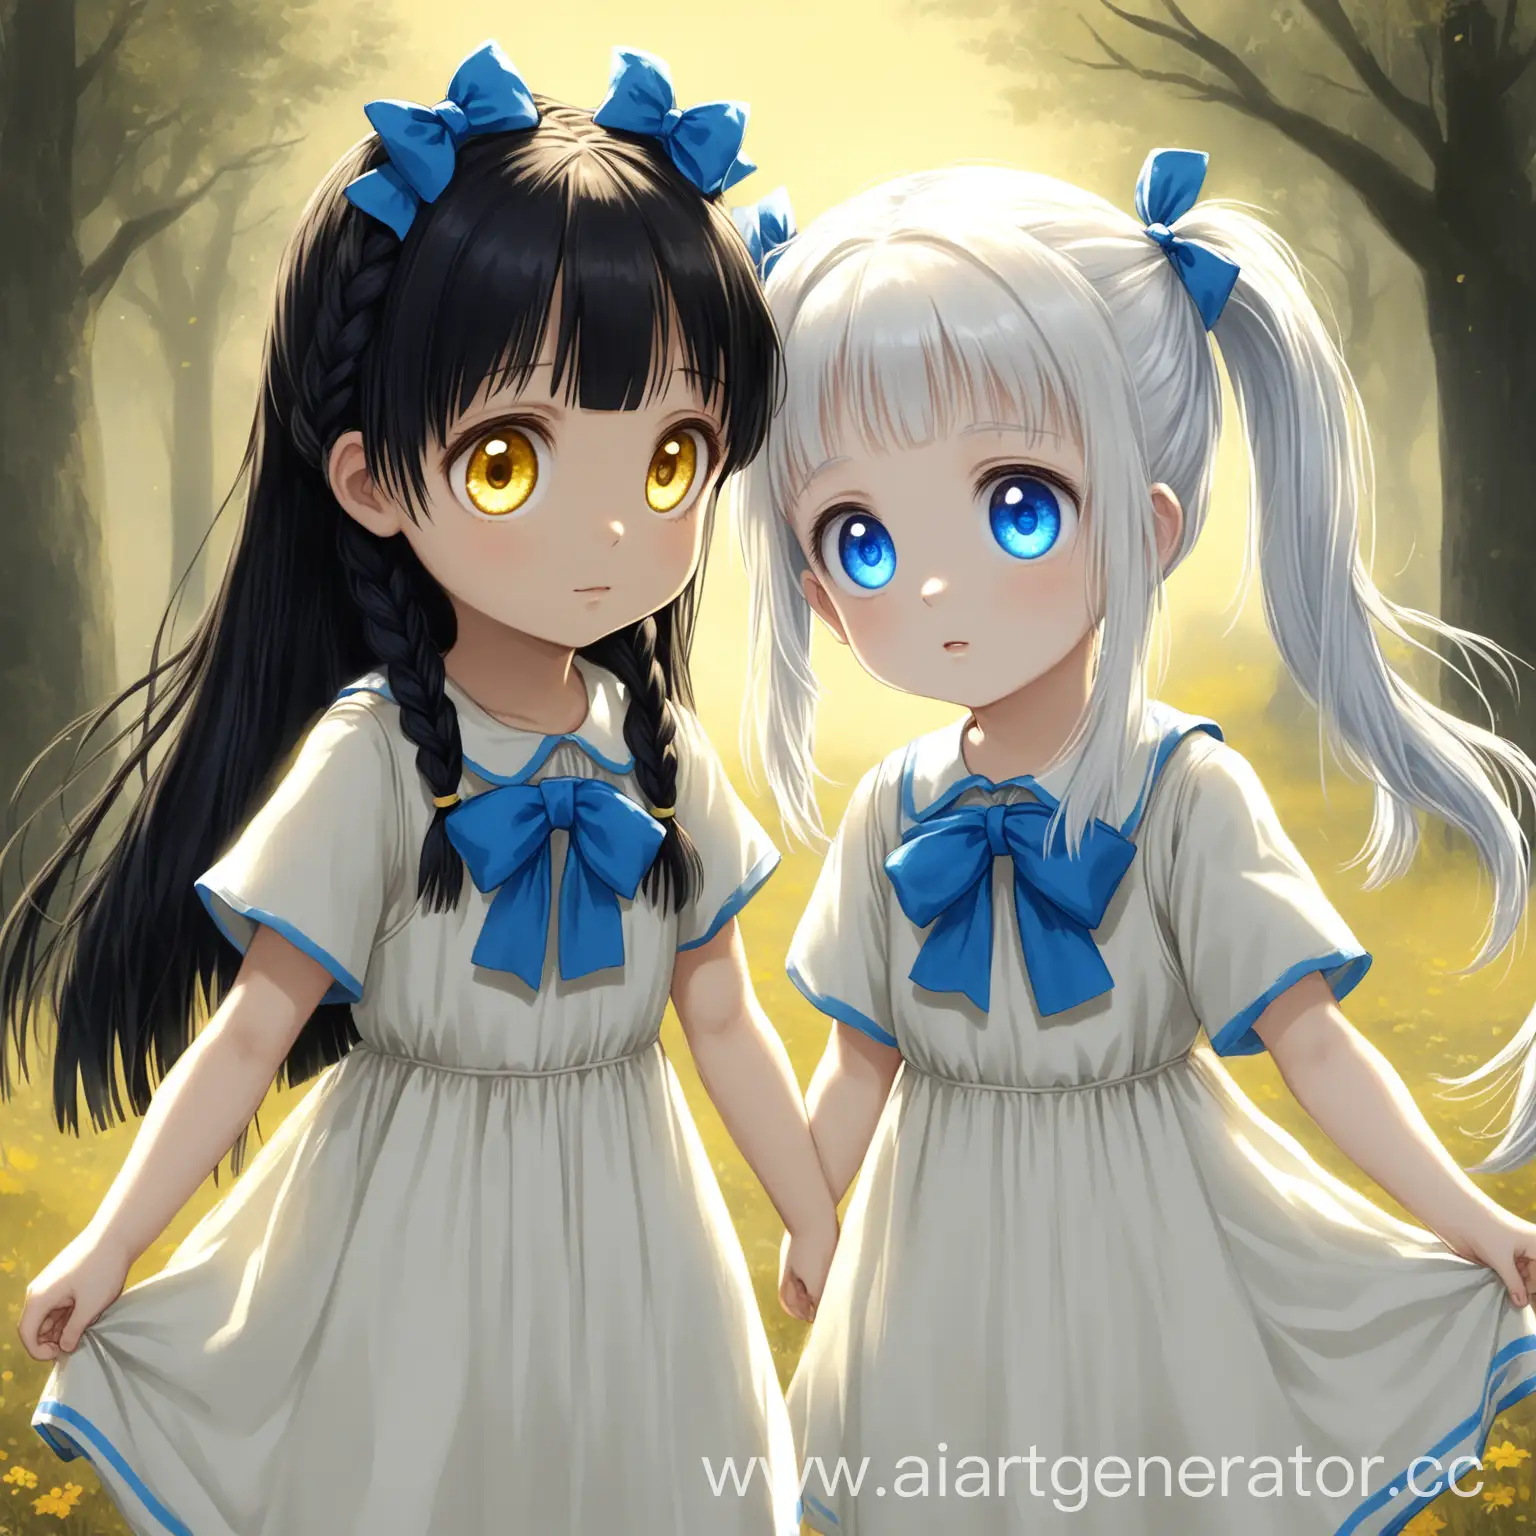 Two-Little-Girls-Playing-Whitehaired-Girl-in-White-Dress-and-Blackhaired-Girl-in-Dark-Sarafan